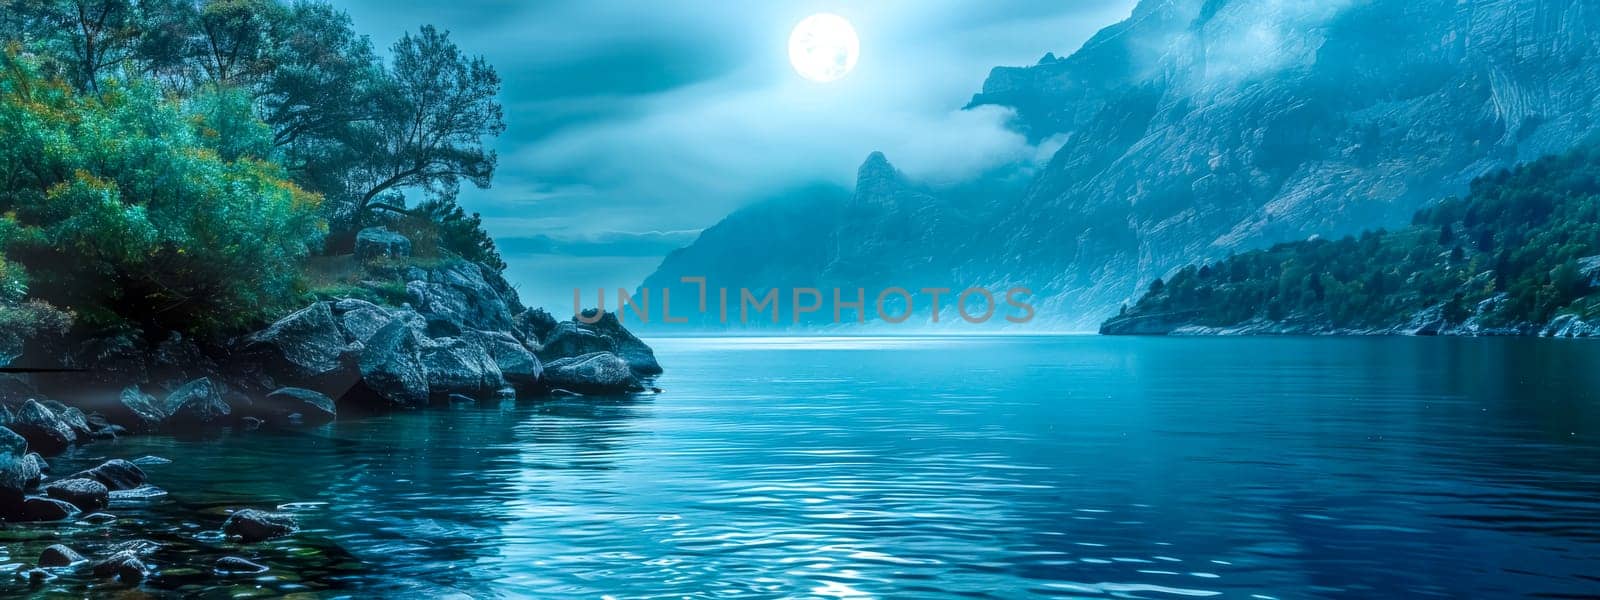 Serenely tranquil full moonlit lake landscape with mountains. Rocks. And trees reflecting in the calm water under the clear nocturnal sky. Perfect for nighttime photography enthusiasts